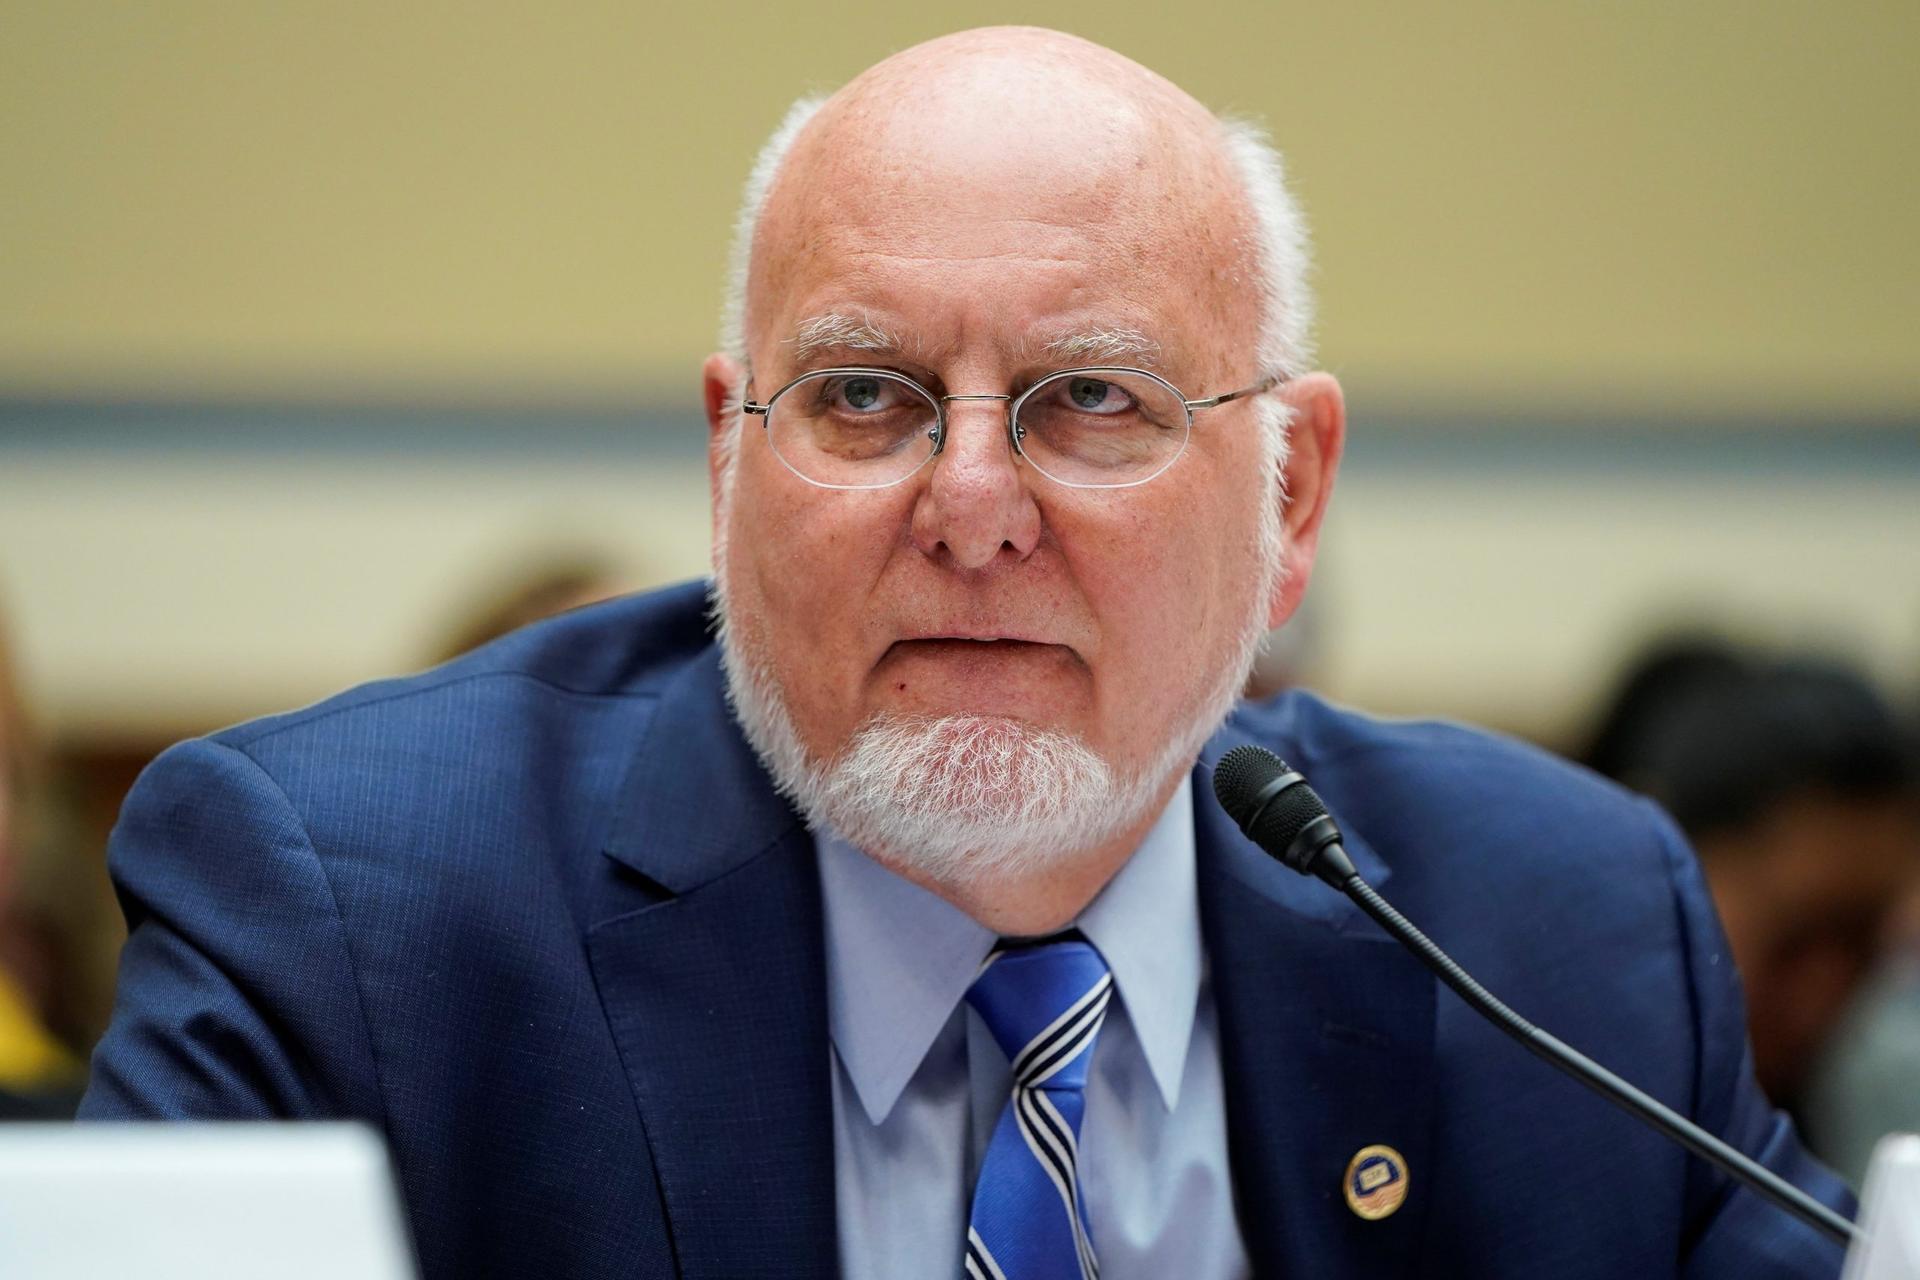 CDC director sees public health risk in children not returning to school